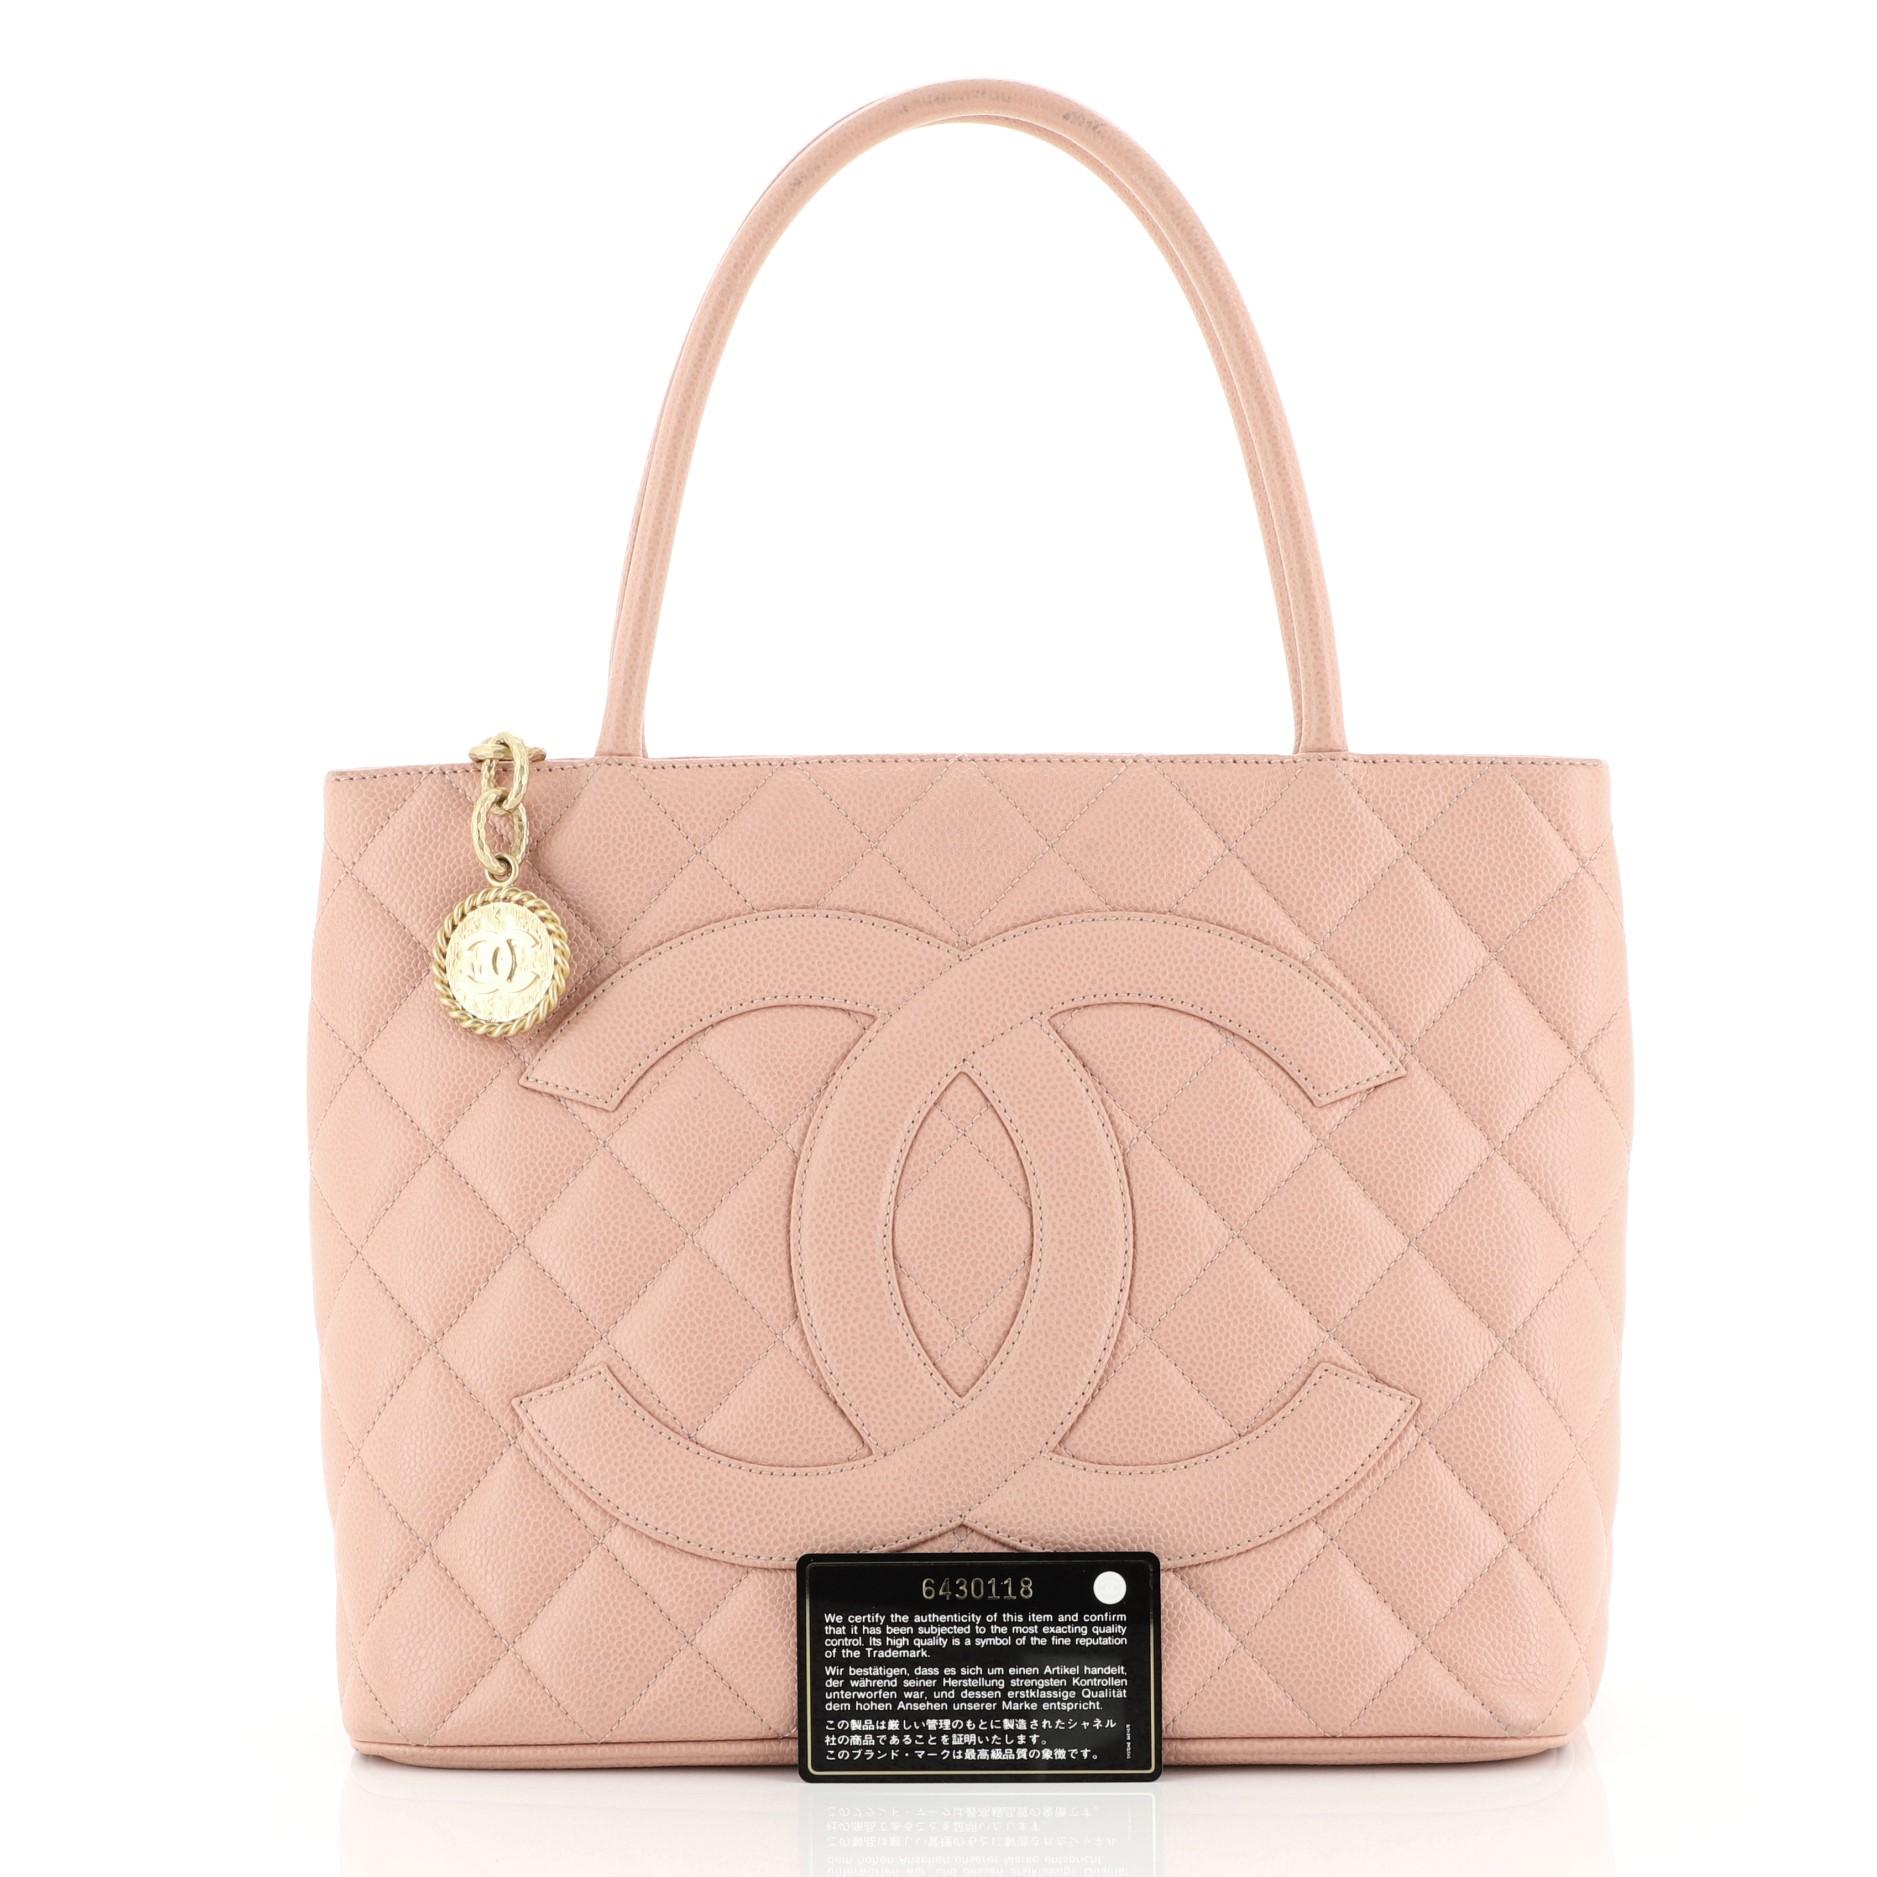 This Chanel Medallion Tote Quilted Caviar, crafted from pink quilted caviar leather, features dual rolled tall handles, oversized stitched CC logo, exterior back slip pocket, and matte gold-tone hardware. Its zip closure opens to a pink leather